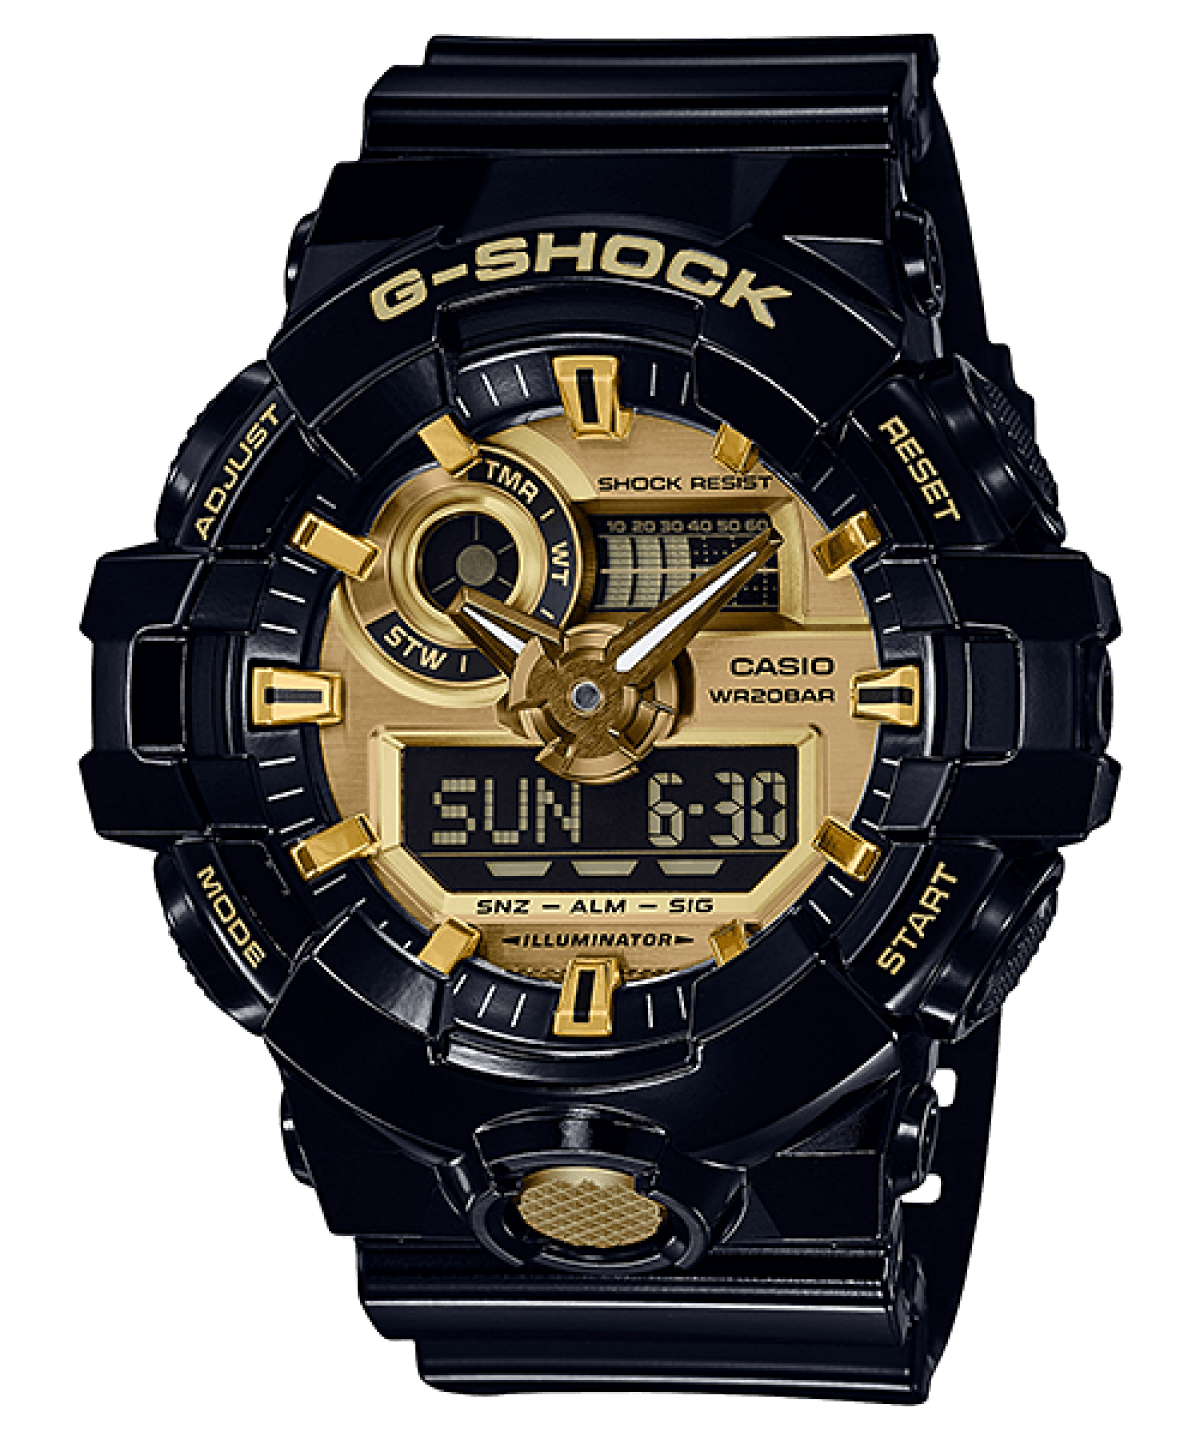 GA-710GB-1ACR Series Watch - Black and Gold